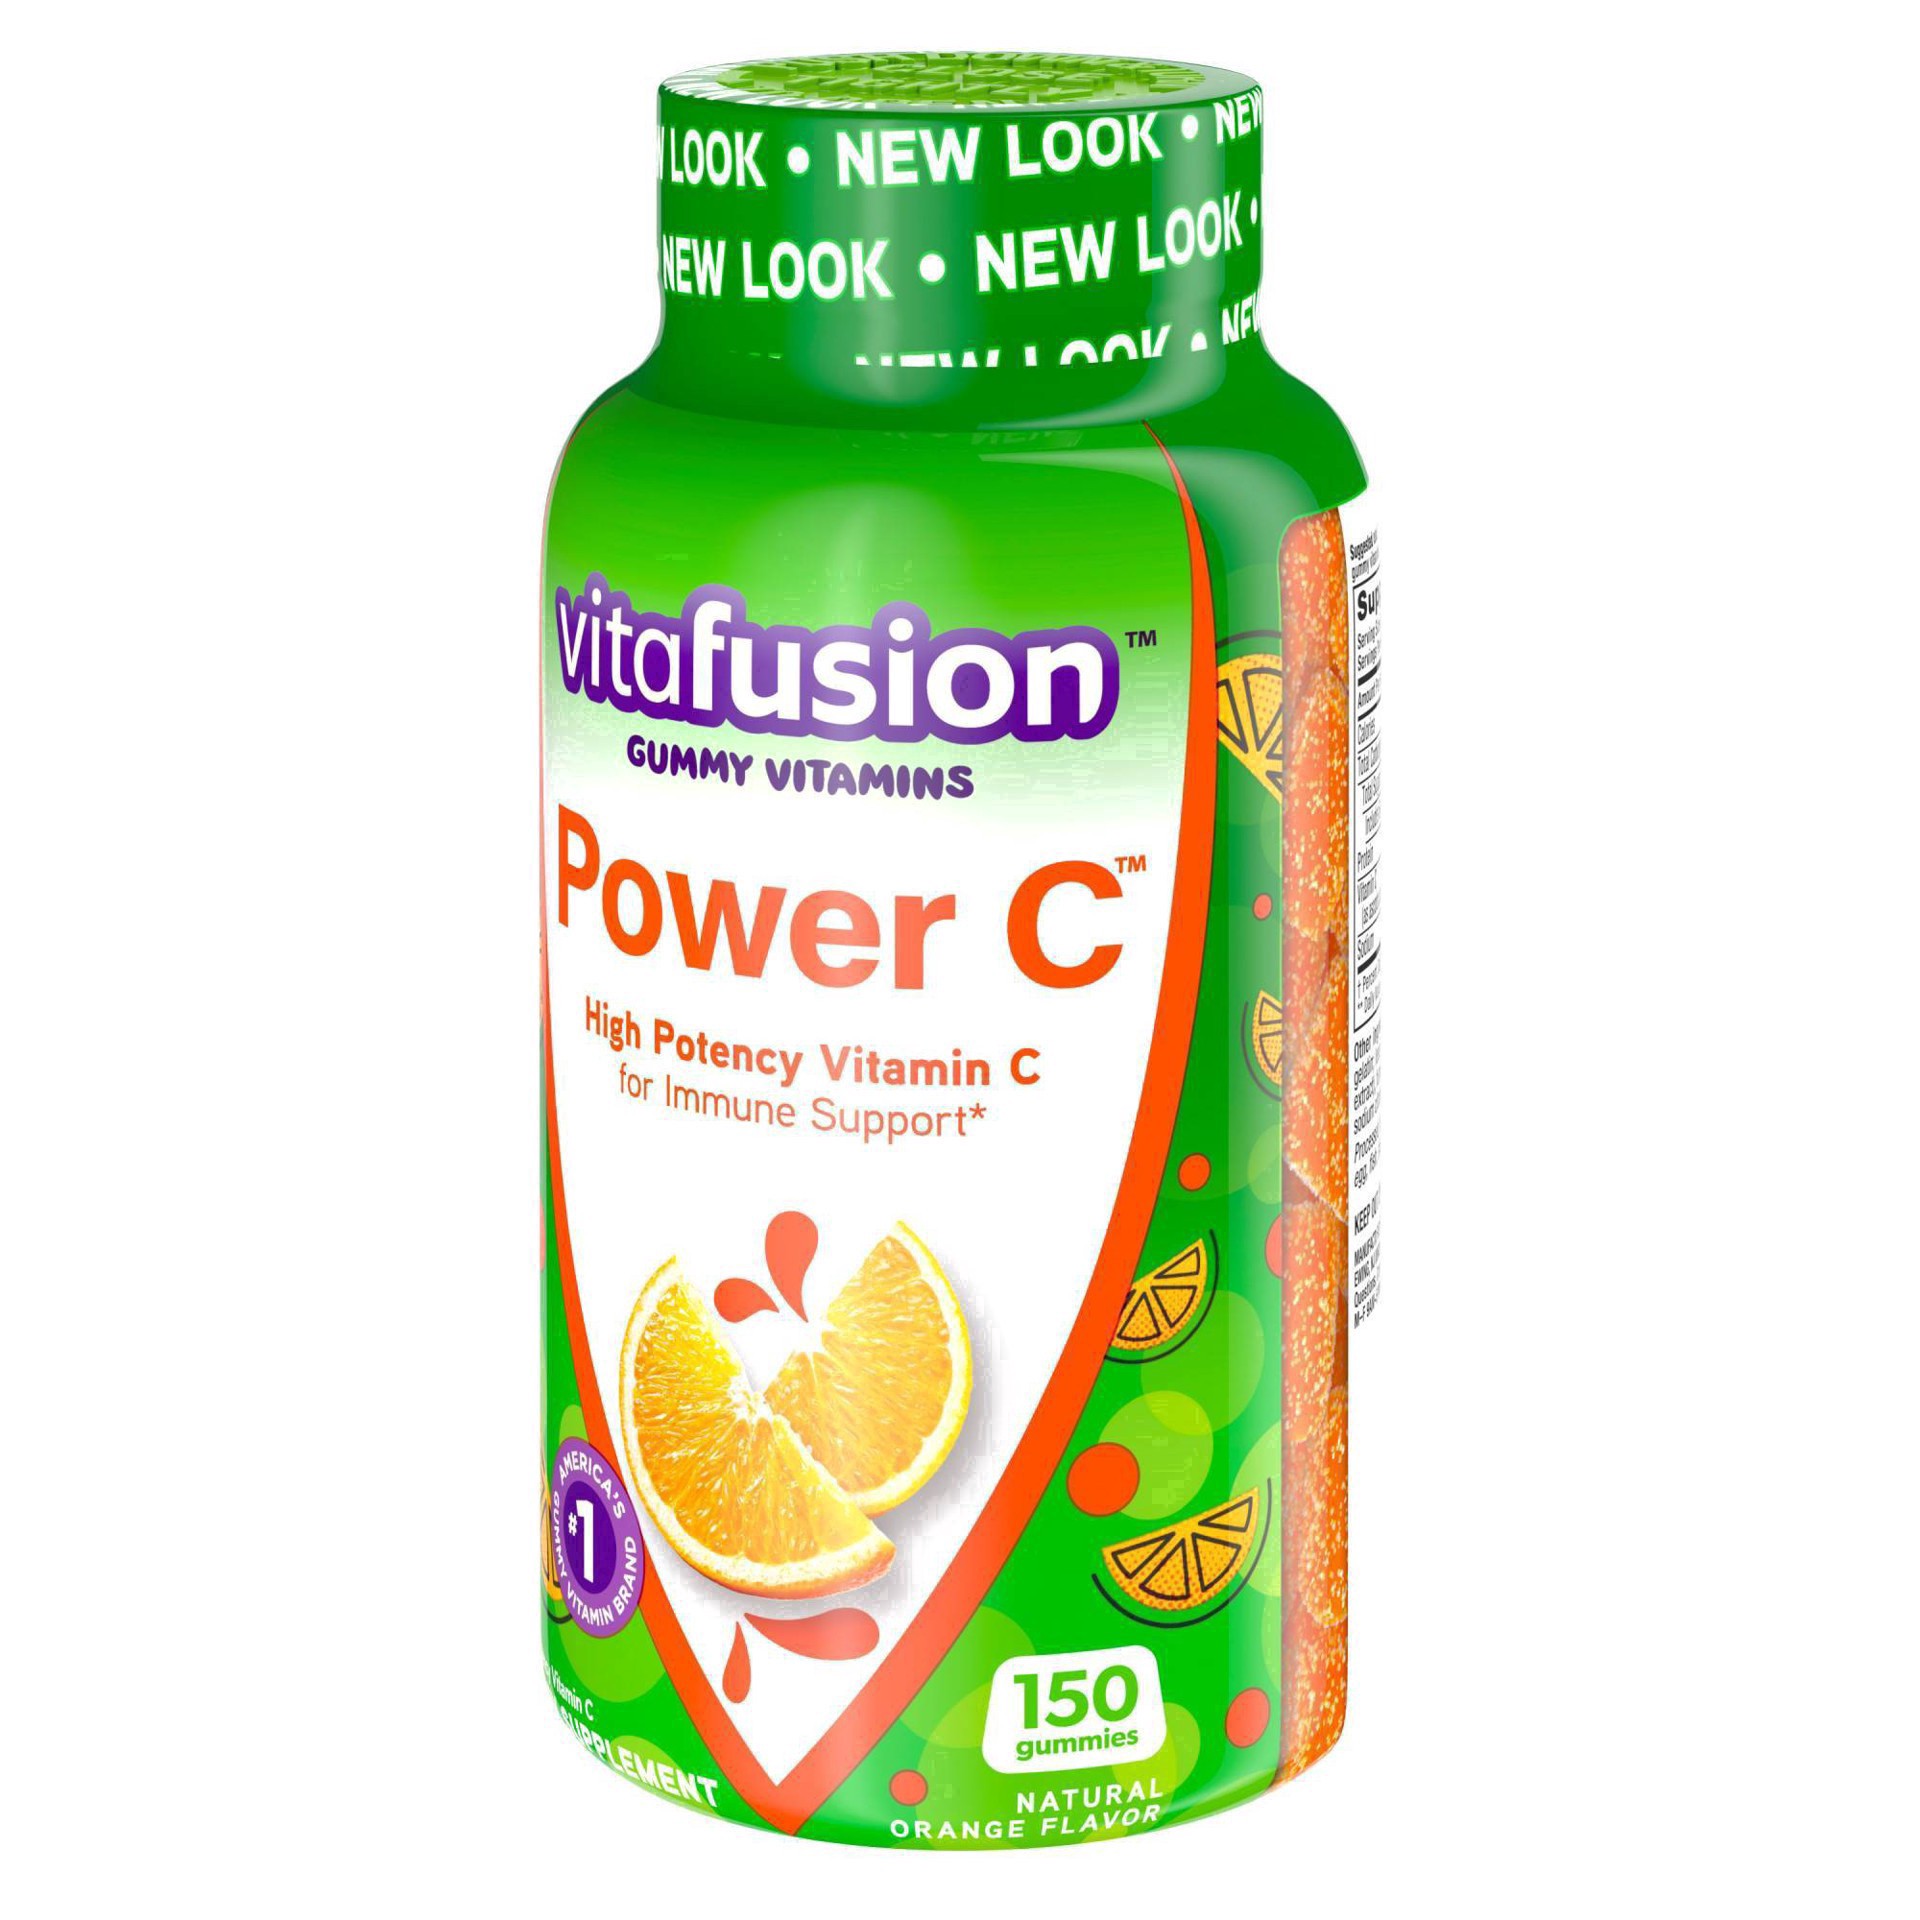 slide 5 of 78, vitafusion Power C Gummy Immune Support* with vitamin C, Delicious Orange Flavor, 150ct (50 day supply), from America's Number One Gummy Vitamin Brand, 150 cnt